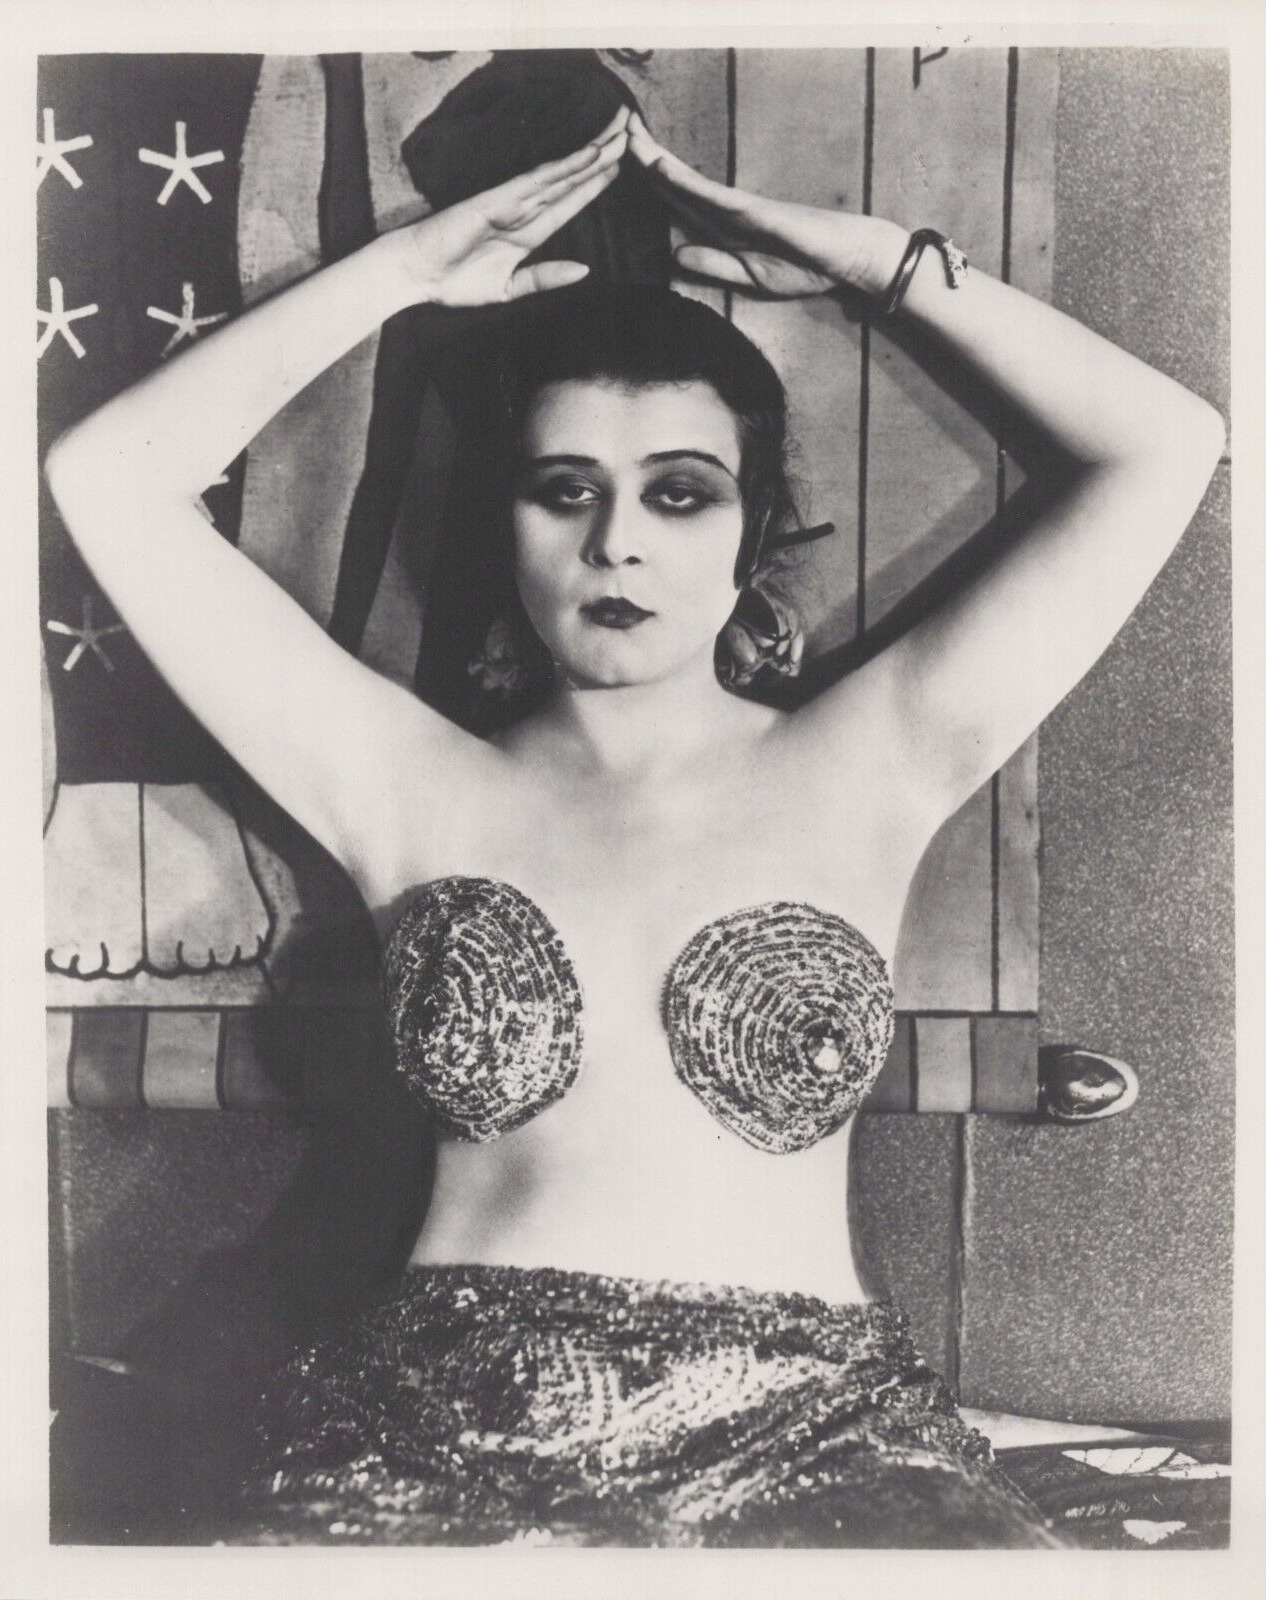 HOLLYWOOD BEAUTY THEDA BARA as CLEOPATRA STUNNING PORTRAIT 1970s Photo C23